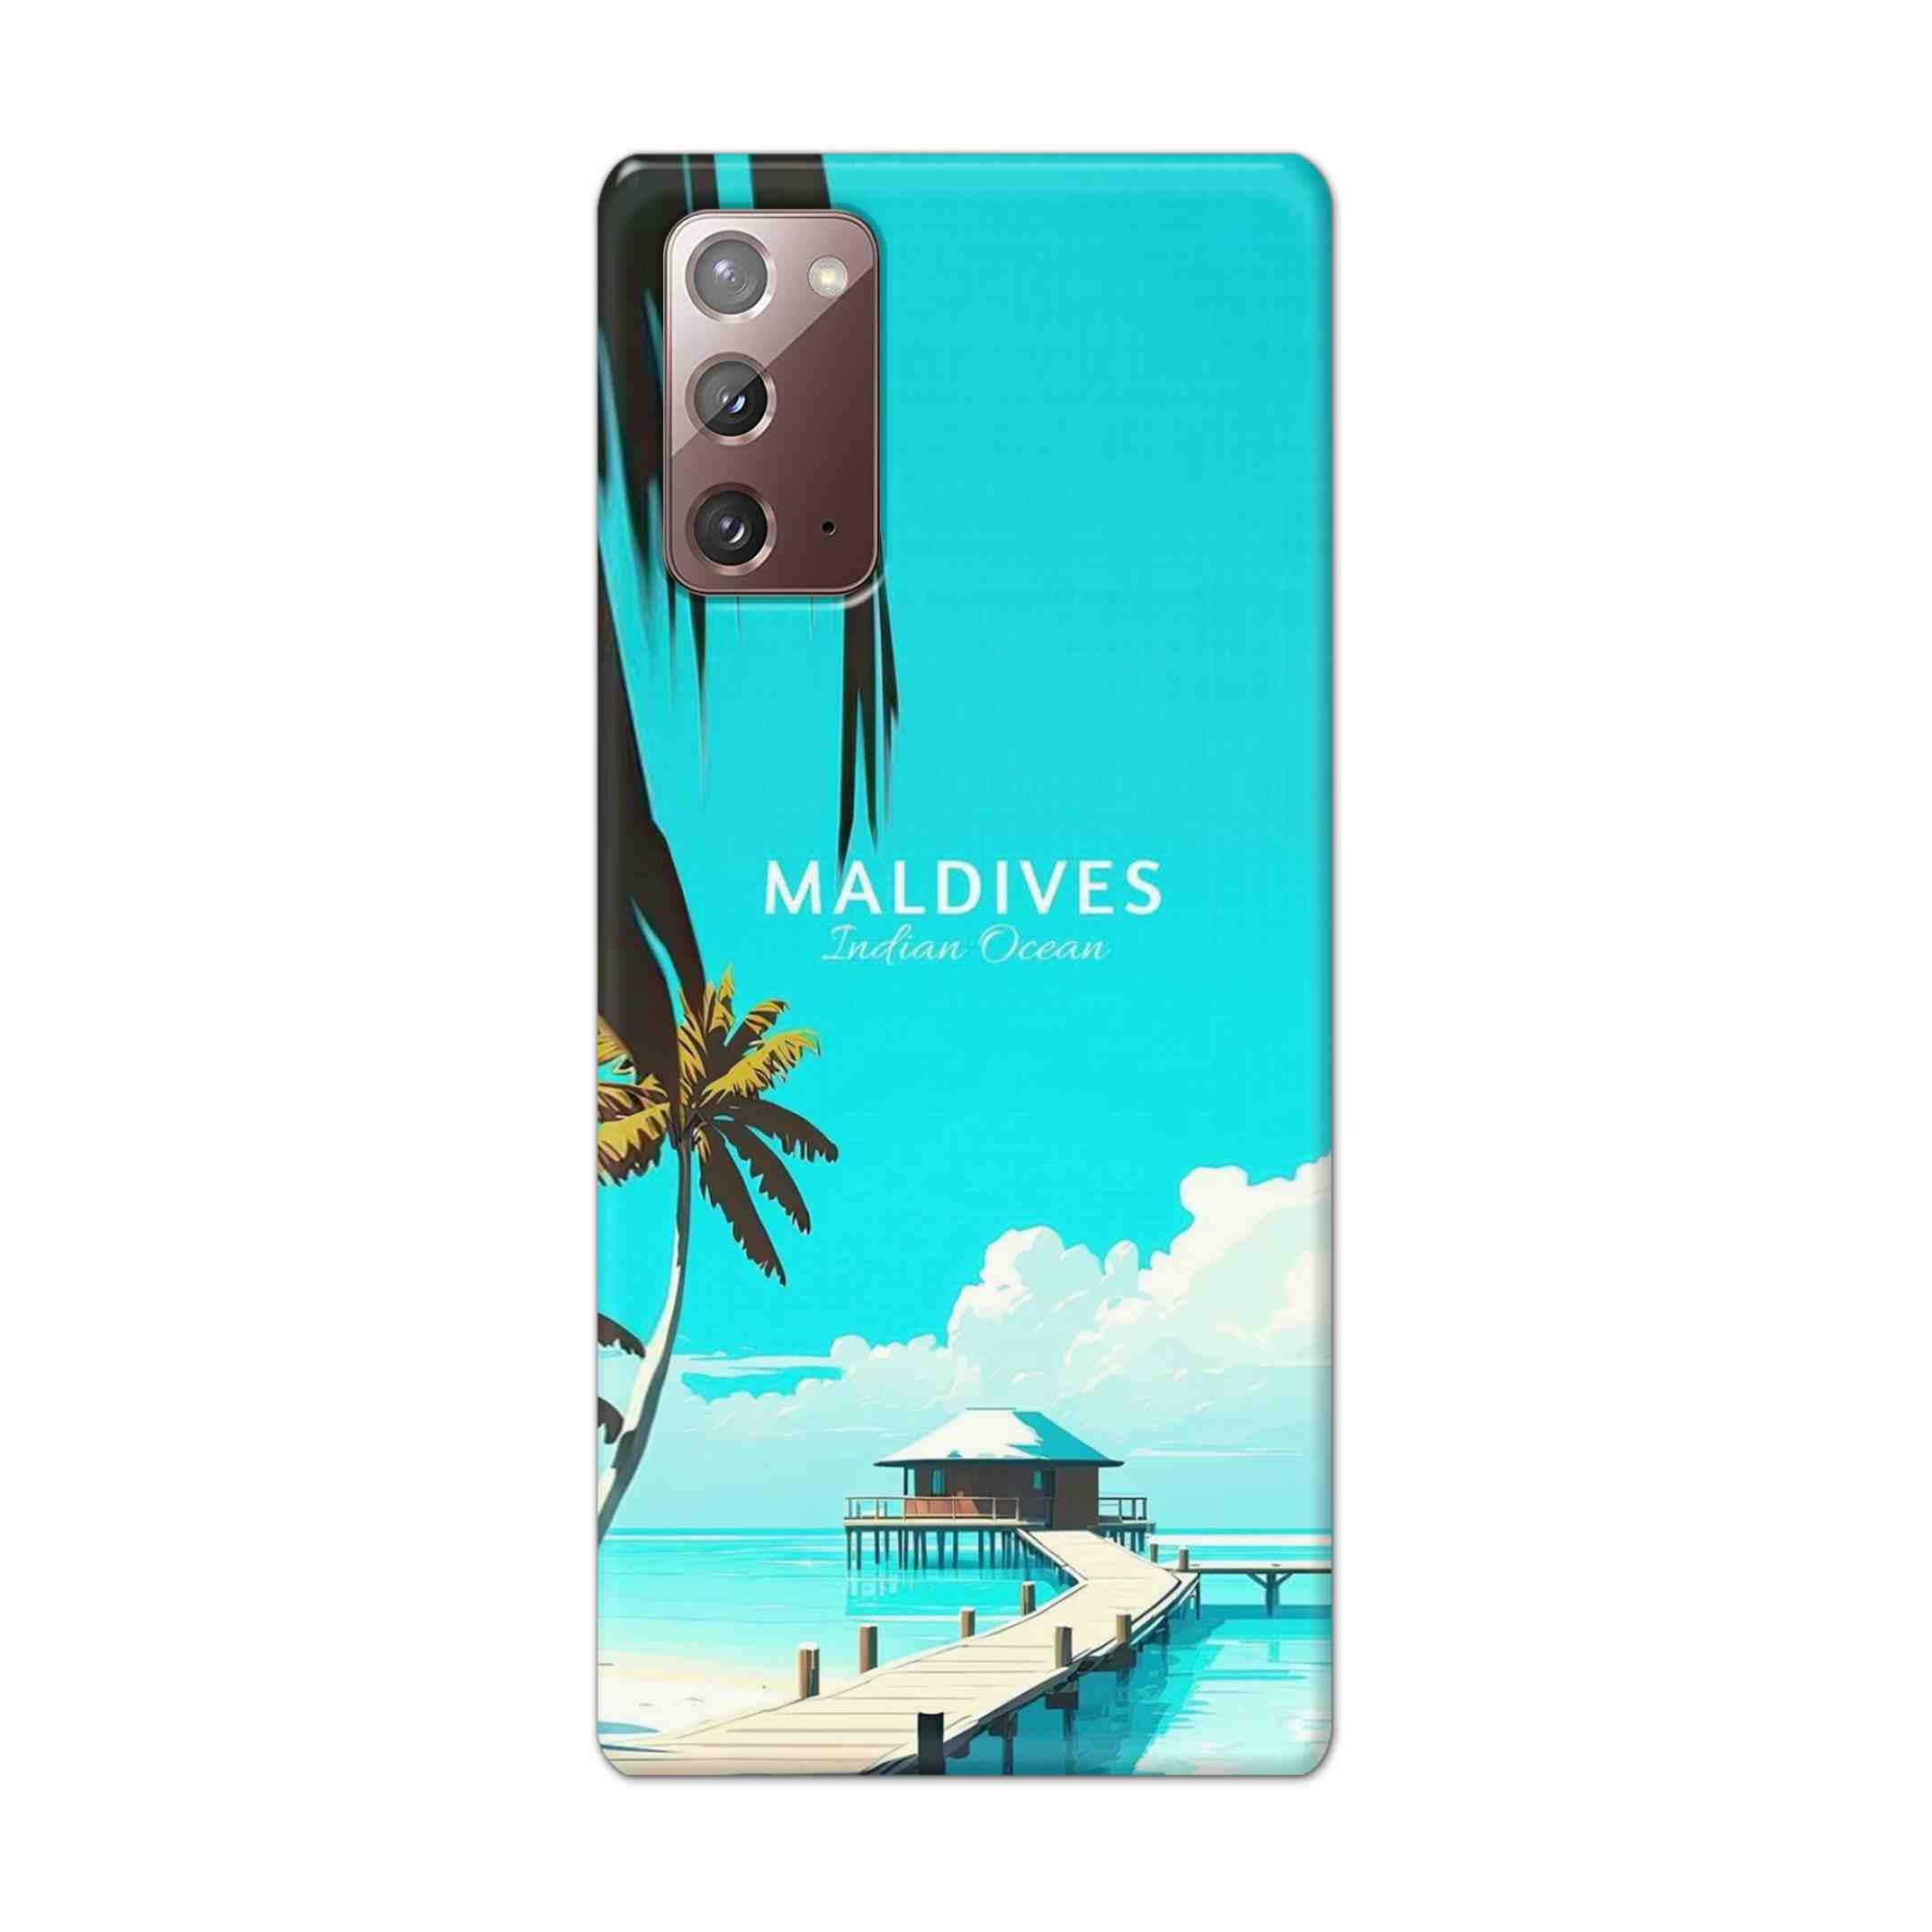 Buy Maldives Hard Back Mobile Phone Case Cover For Samsung Galaxy Note 20 Online